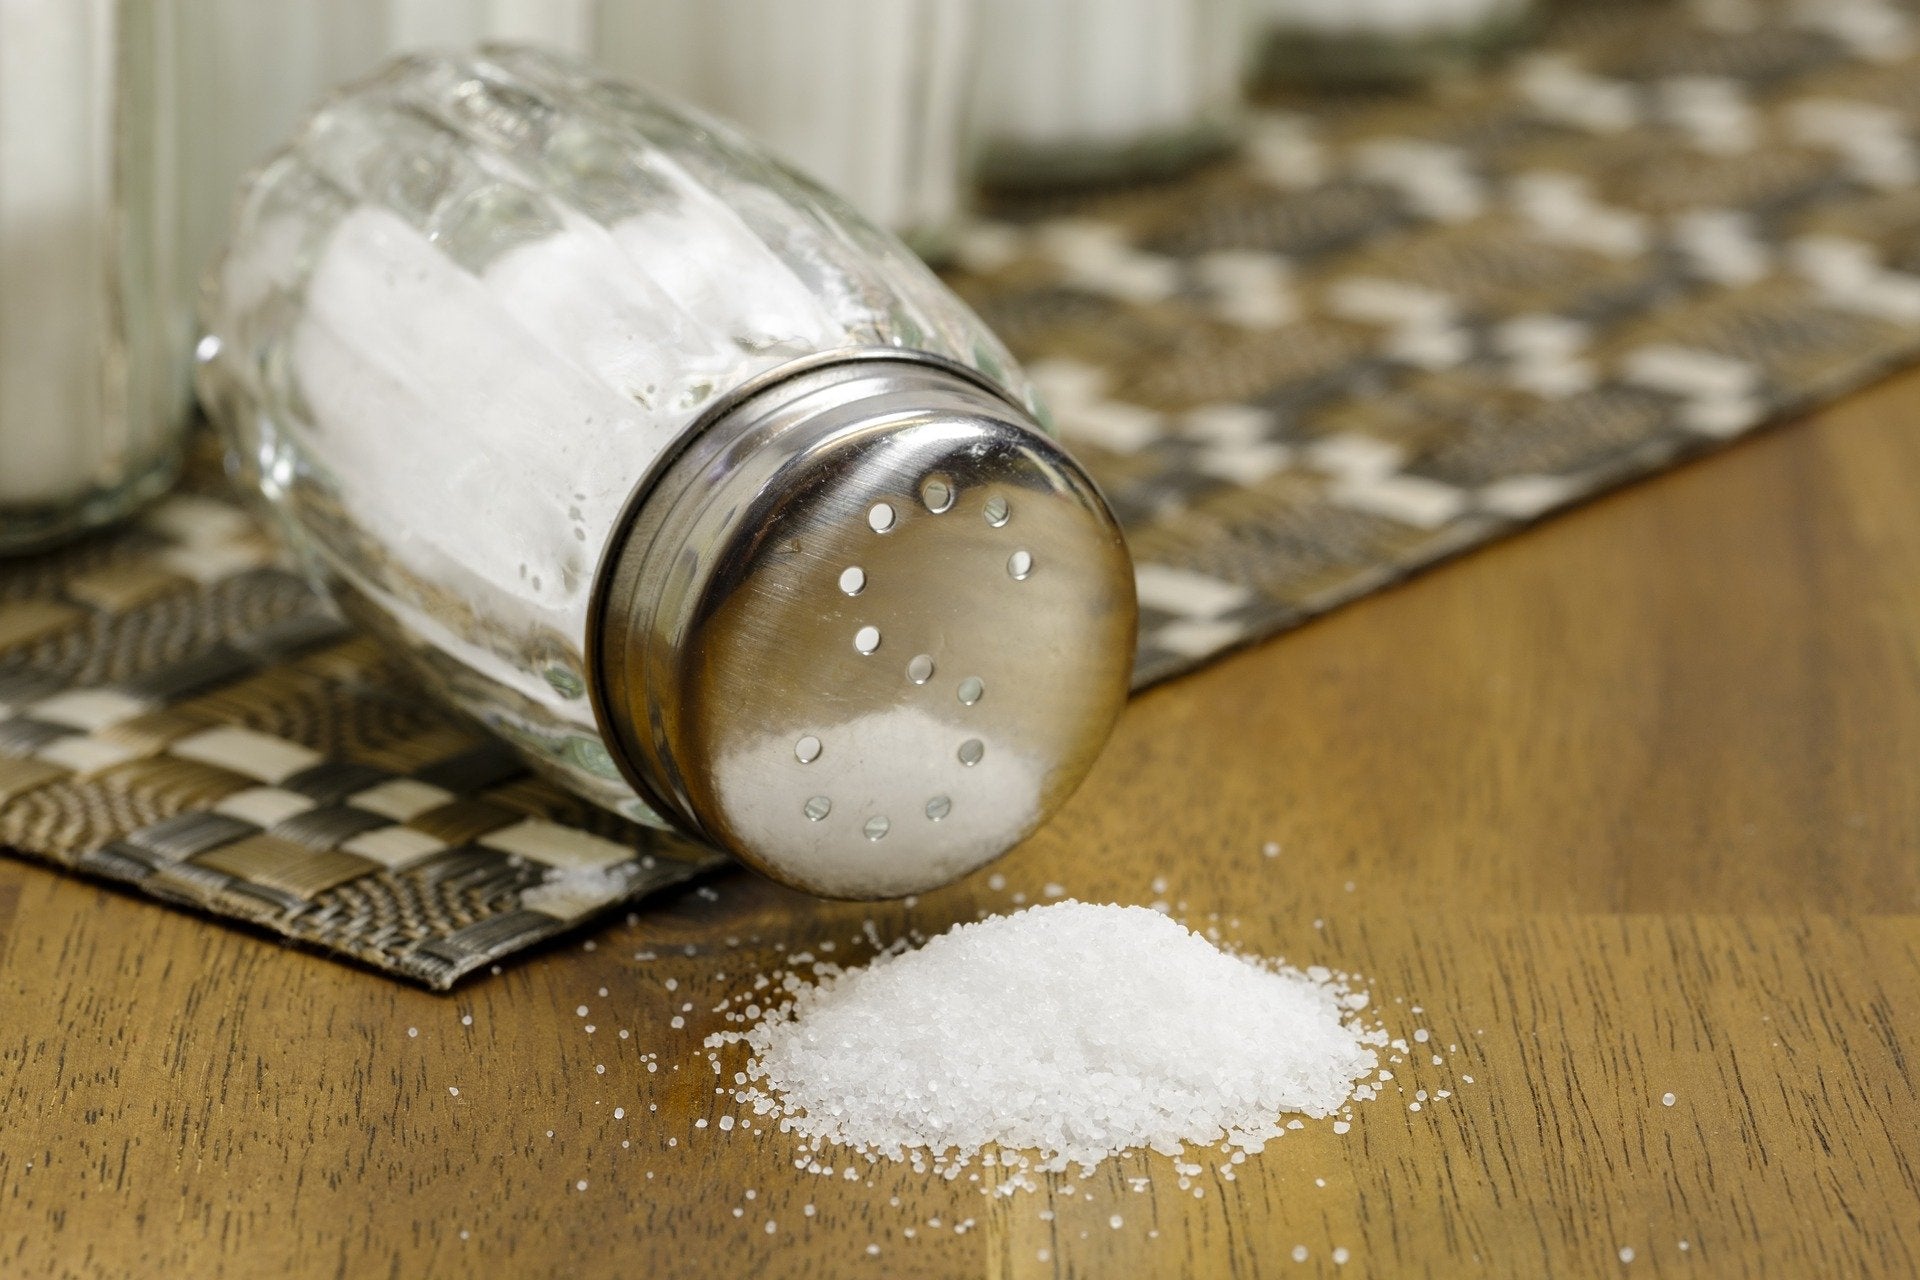 Pros and Cons of a Low Sodium Diet: What You Need to Know